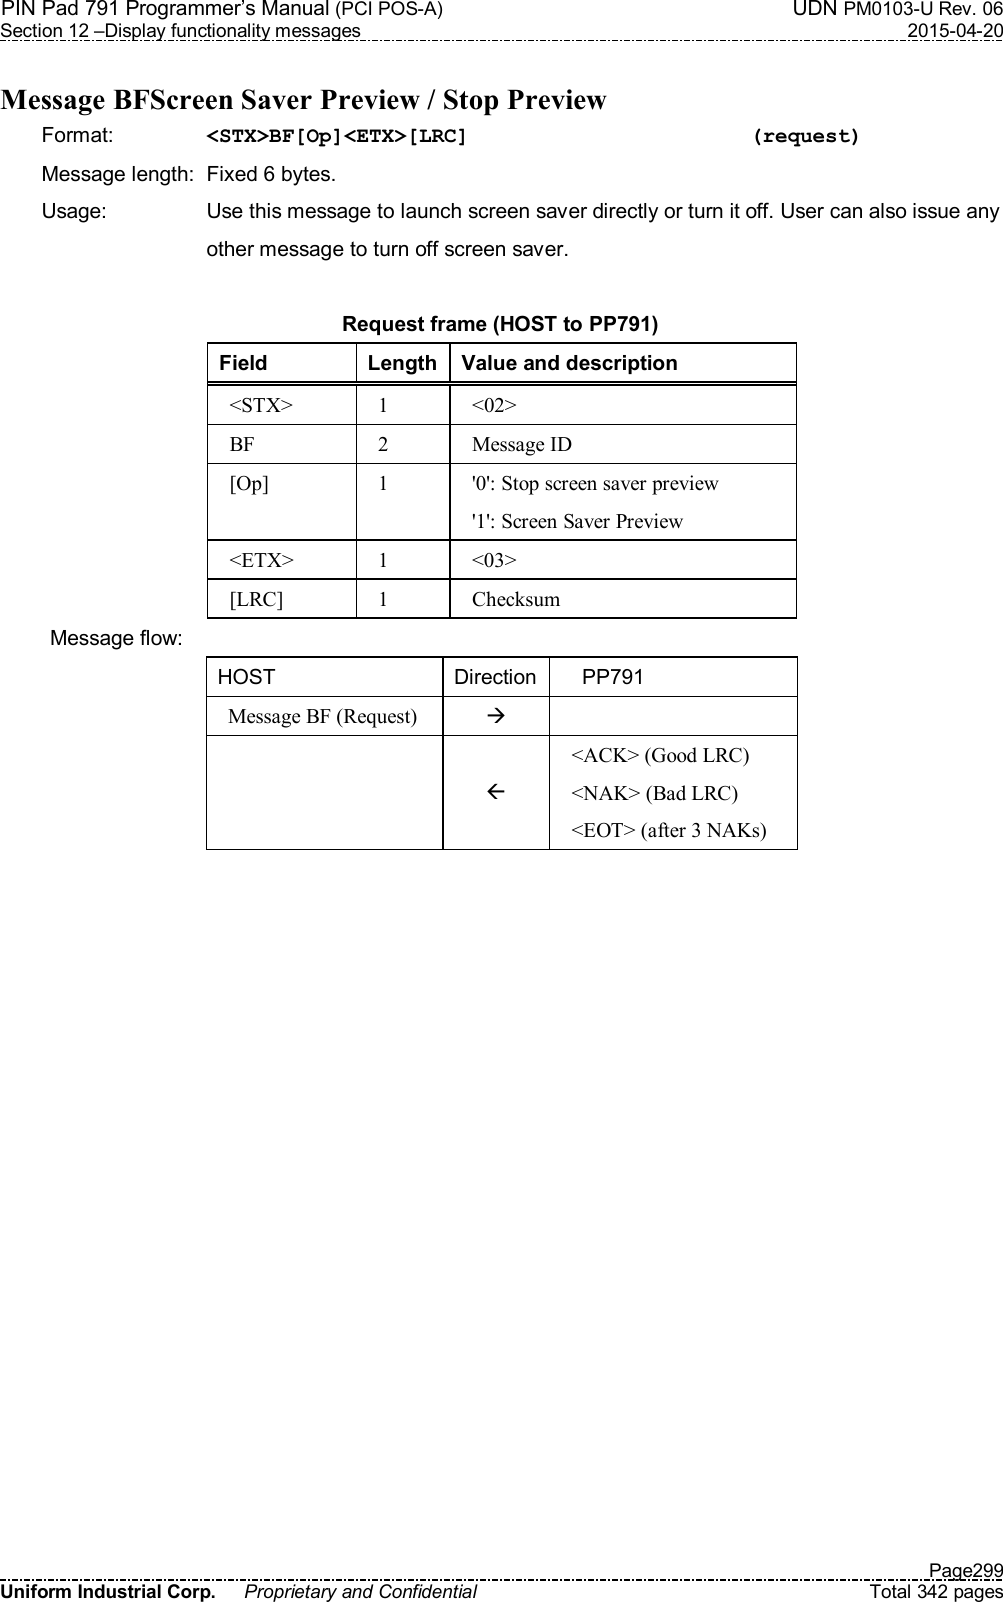 PIN Pad 791 Programmer’s Manual (PCI POS-A)  UDN PM0103-U Rev. 06 Section 12 –Display functionality messages  2015-04-20   Page299 Uniform Industrial Corp.  Proprietary and Confidential  Total 342 pages  Message BFScreen Saver Preview / Stop Preview Format:    &lt;STX&gt;BF[Op]&lt;ETX&gt;[LRC]            (request) Message length:  Fixed 6 bytes. Usage:  Use this message to launch screen saver directly or turn it off. User can also issue any other message to turn off screen saver.  Request frame (HOST to PP791) Field  Length Value and description &lt;STX&gt;  1  &lt;02&gt; BF  2  Message ID [Op]  1  &apos;0&apos;: Stop screen saver preview &apos;1&apos;: Screen Saver Preview &lt;ETX&gt;  1  &lt;03&gt; [LRC]  1  Checksum Message flow: HOST  Direction     PP791 Message BF (Request)      &lt;ACK&gt; (Good LRC) &lt;NAK&gt; (Bad LRC) &lt;EOT&gt; (after 3 NAKs)  